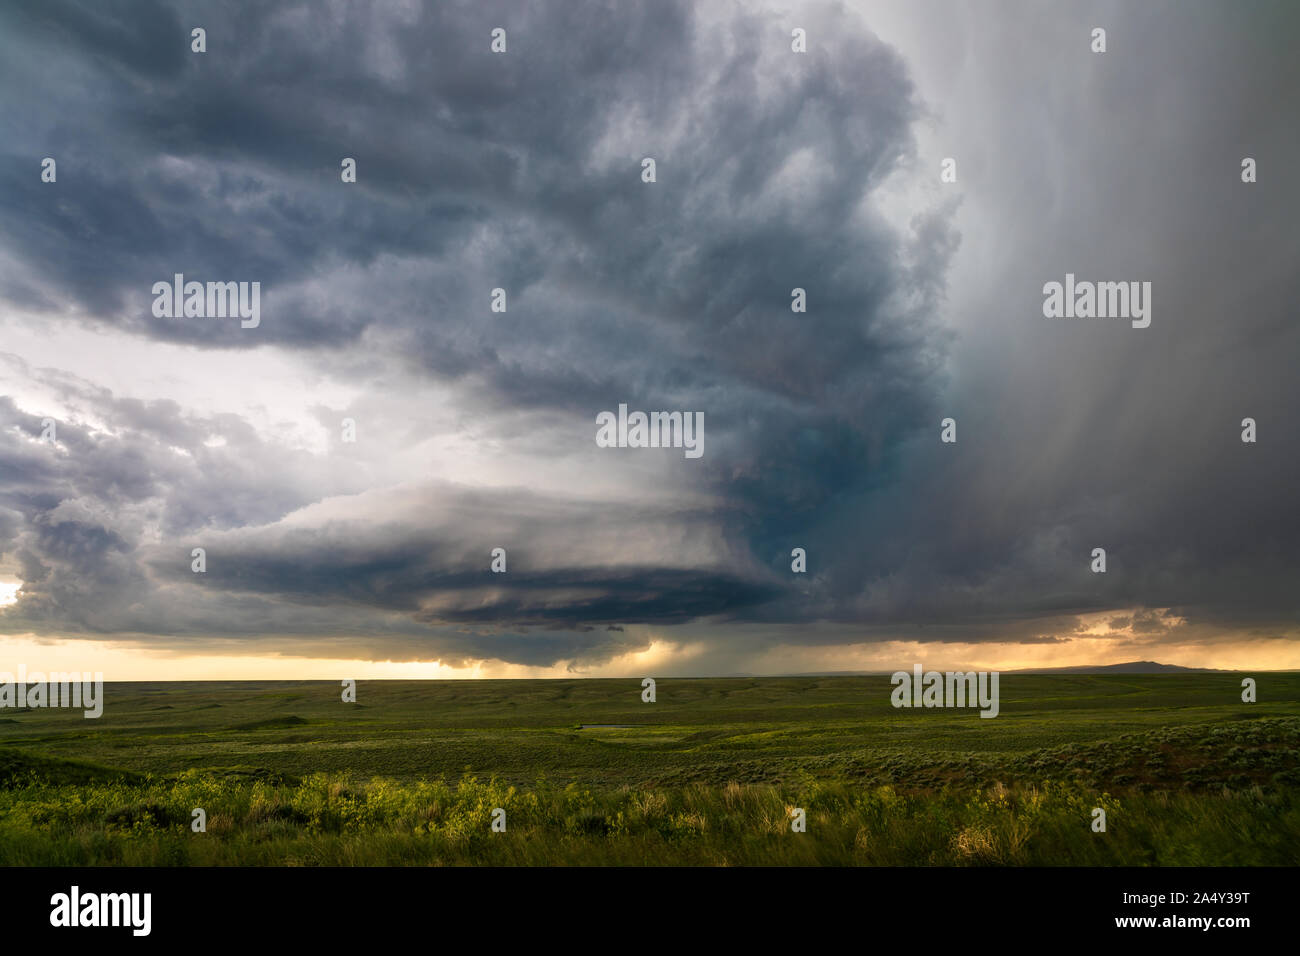 Supercell storm clouds in the plains during a severe weather event near Grass Range Montana, USA Stock Photo